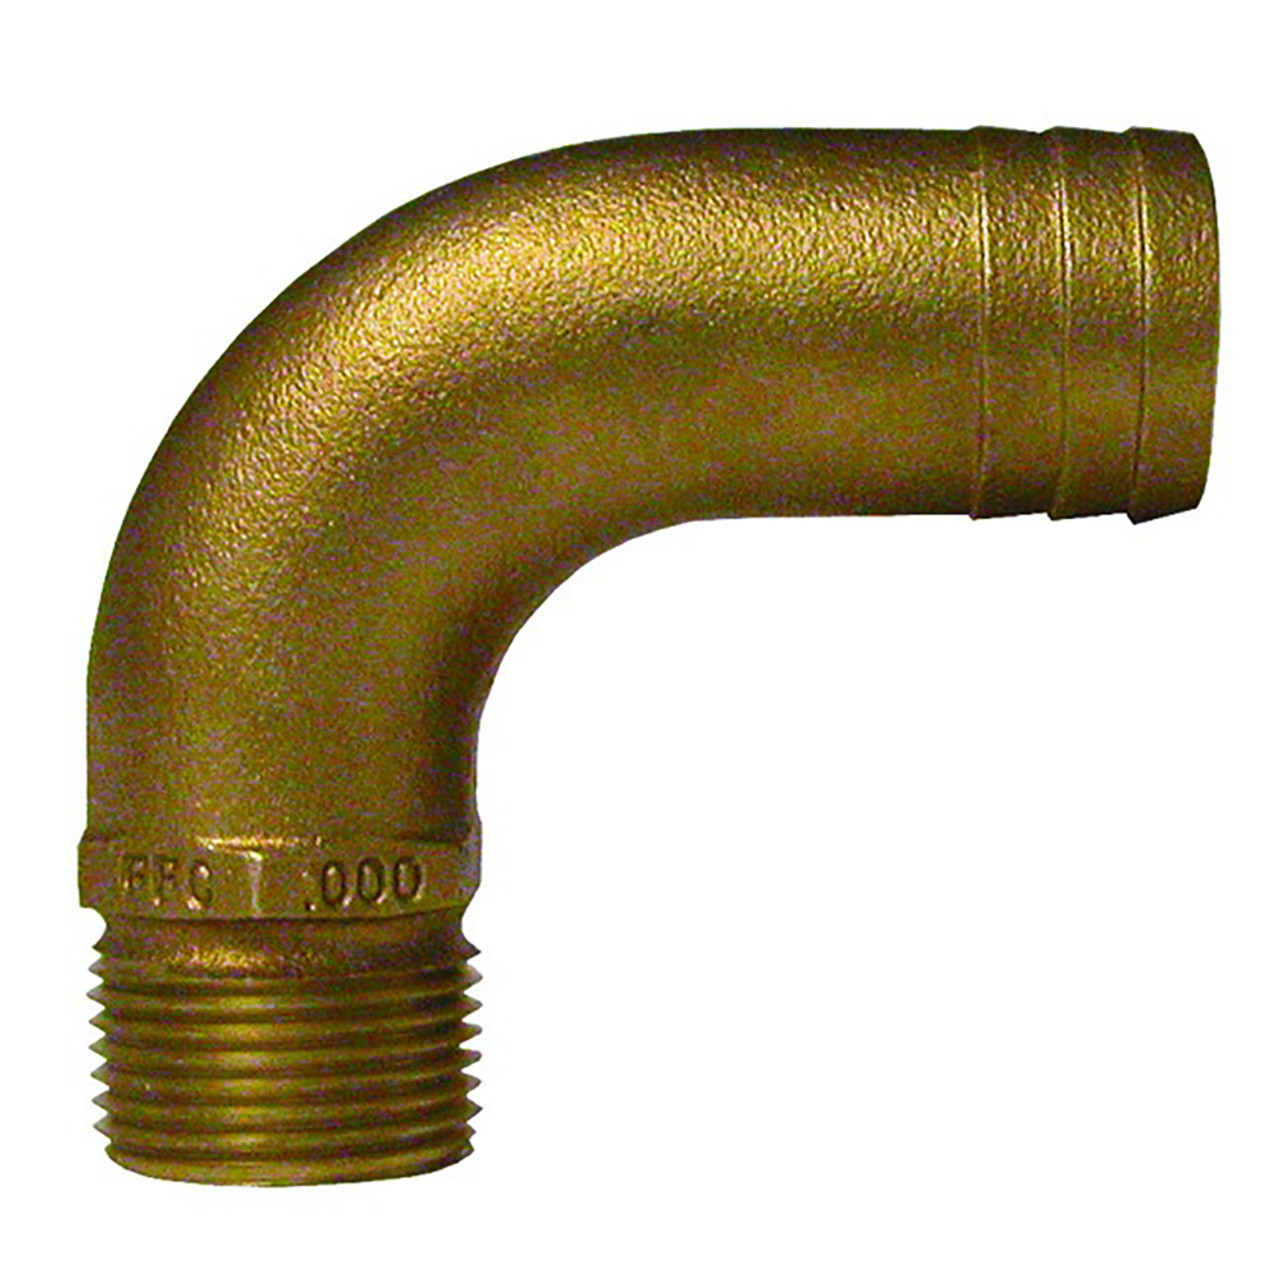 GROCO 1\/2" NPT x 3\/4" ID Bronze Full Flow 90 Elbow Pipe to Hose Fitting [FFC-500]